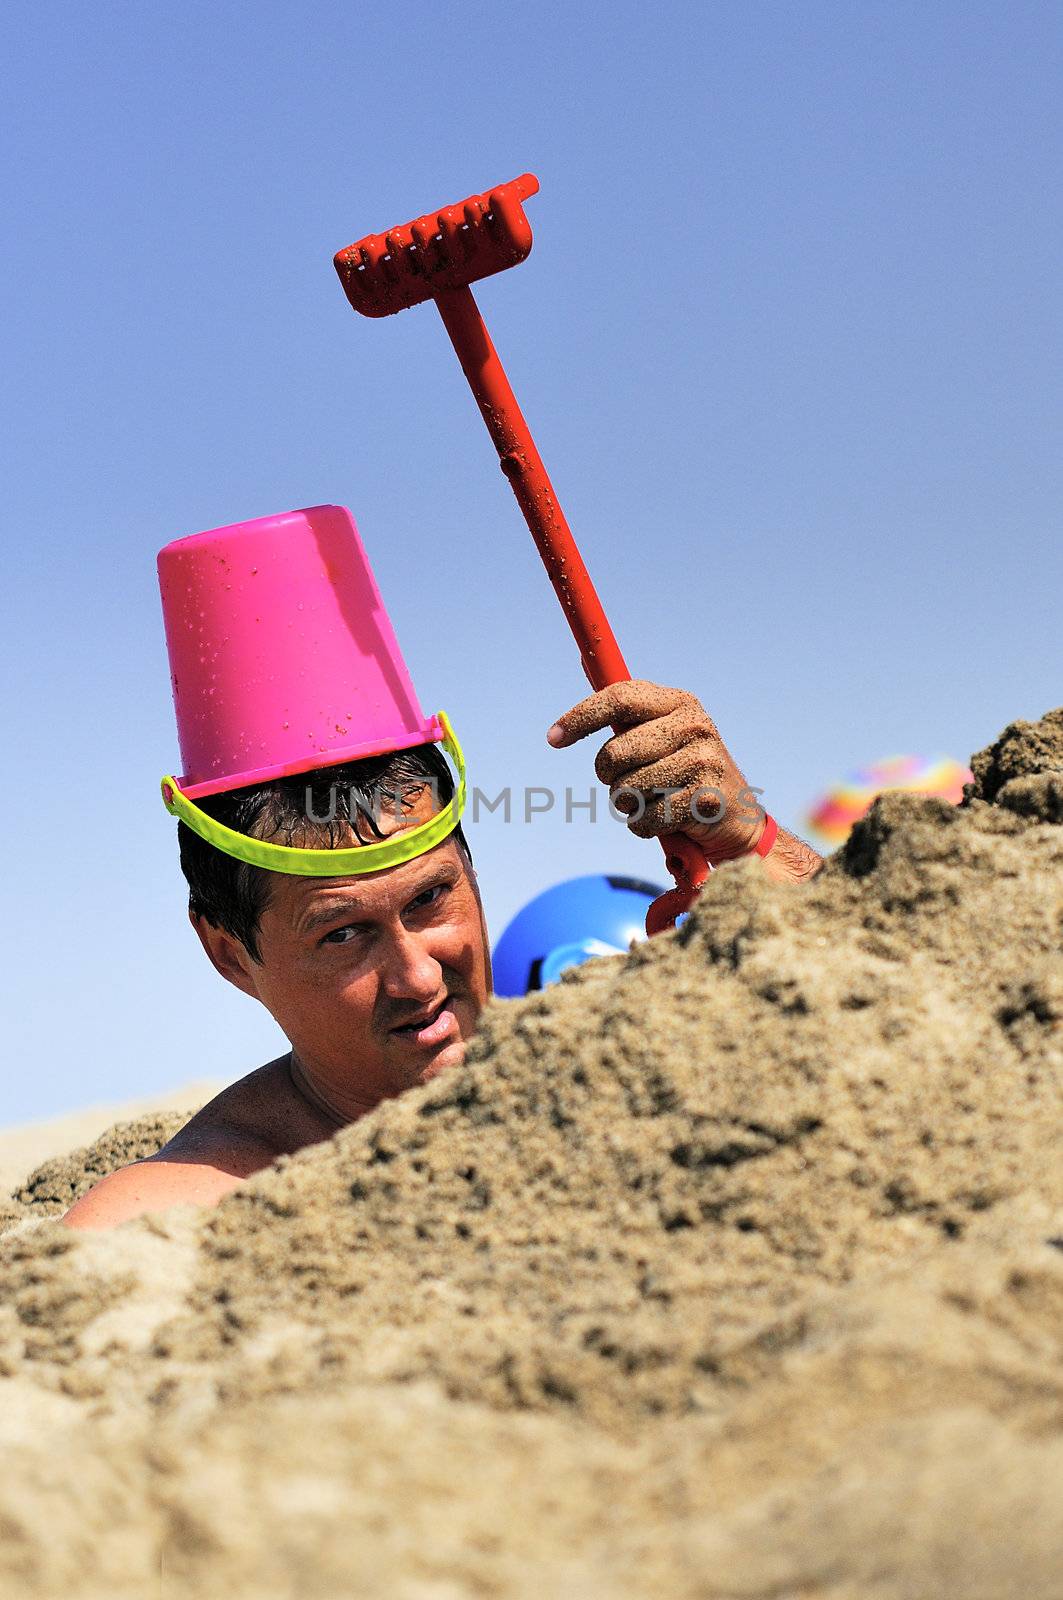 crazy man is joking on the beach in the sand with a rake and a bucket